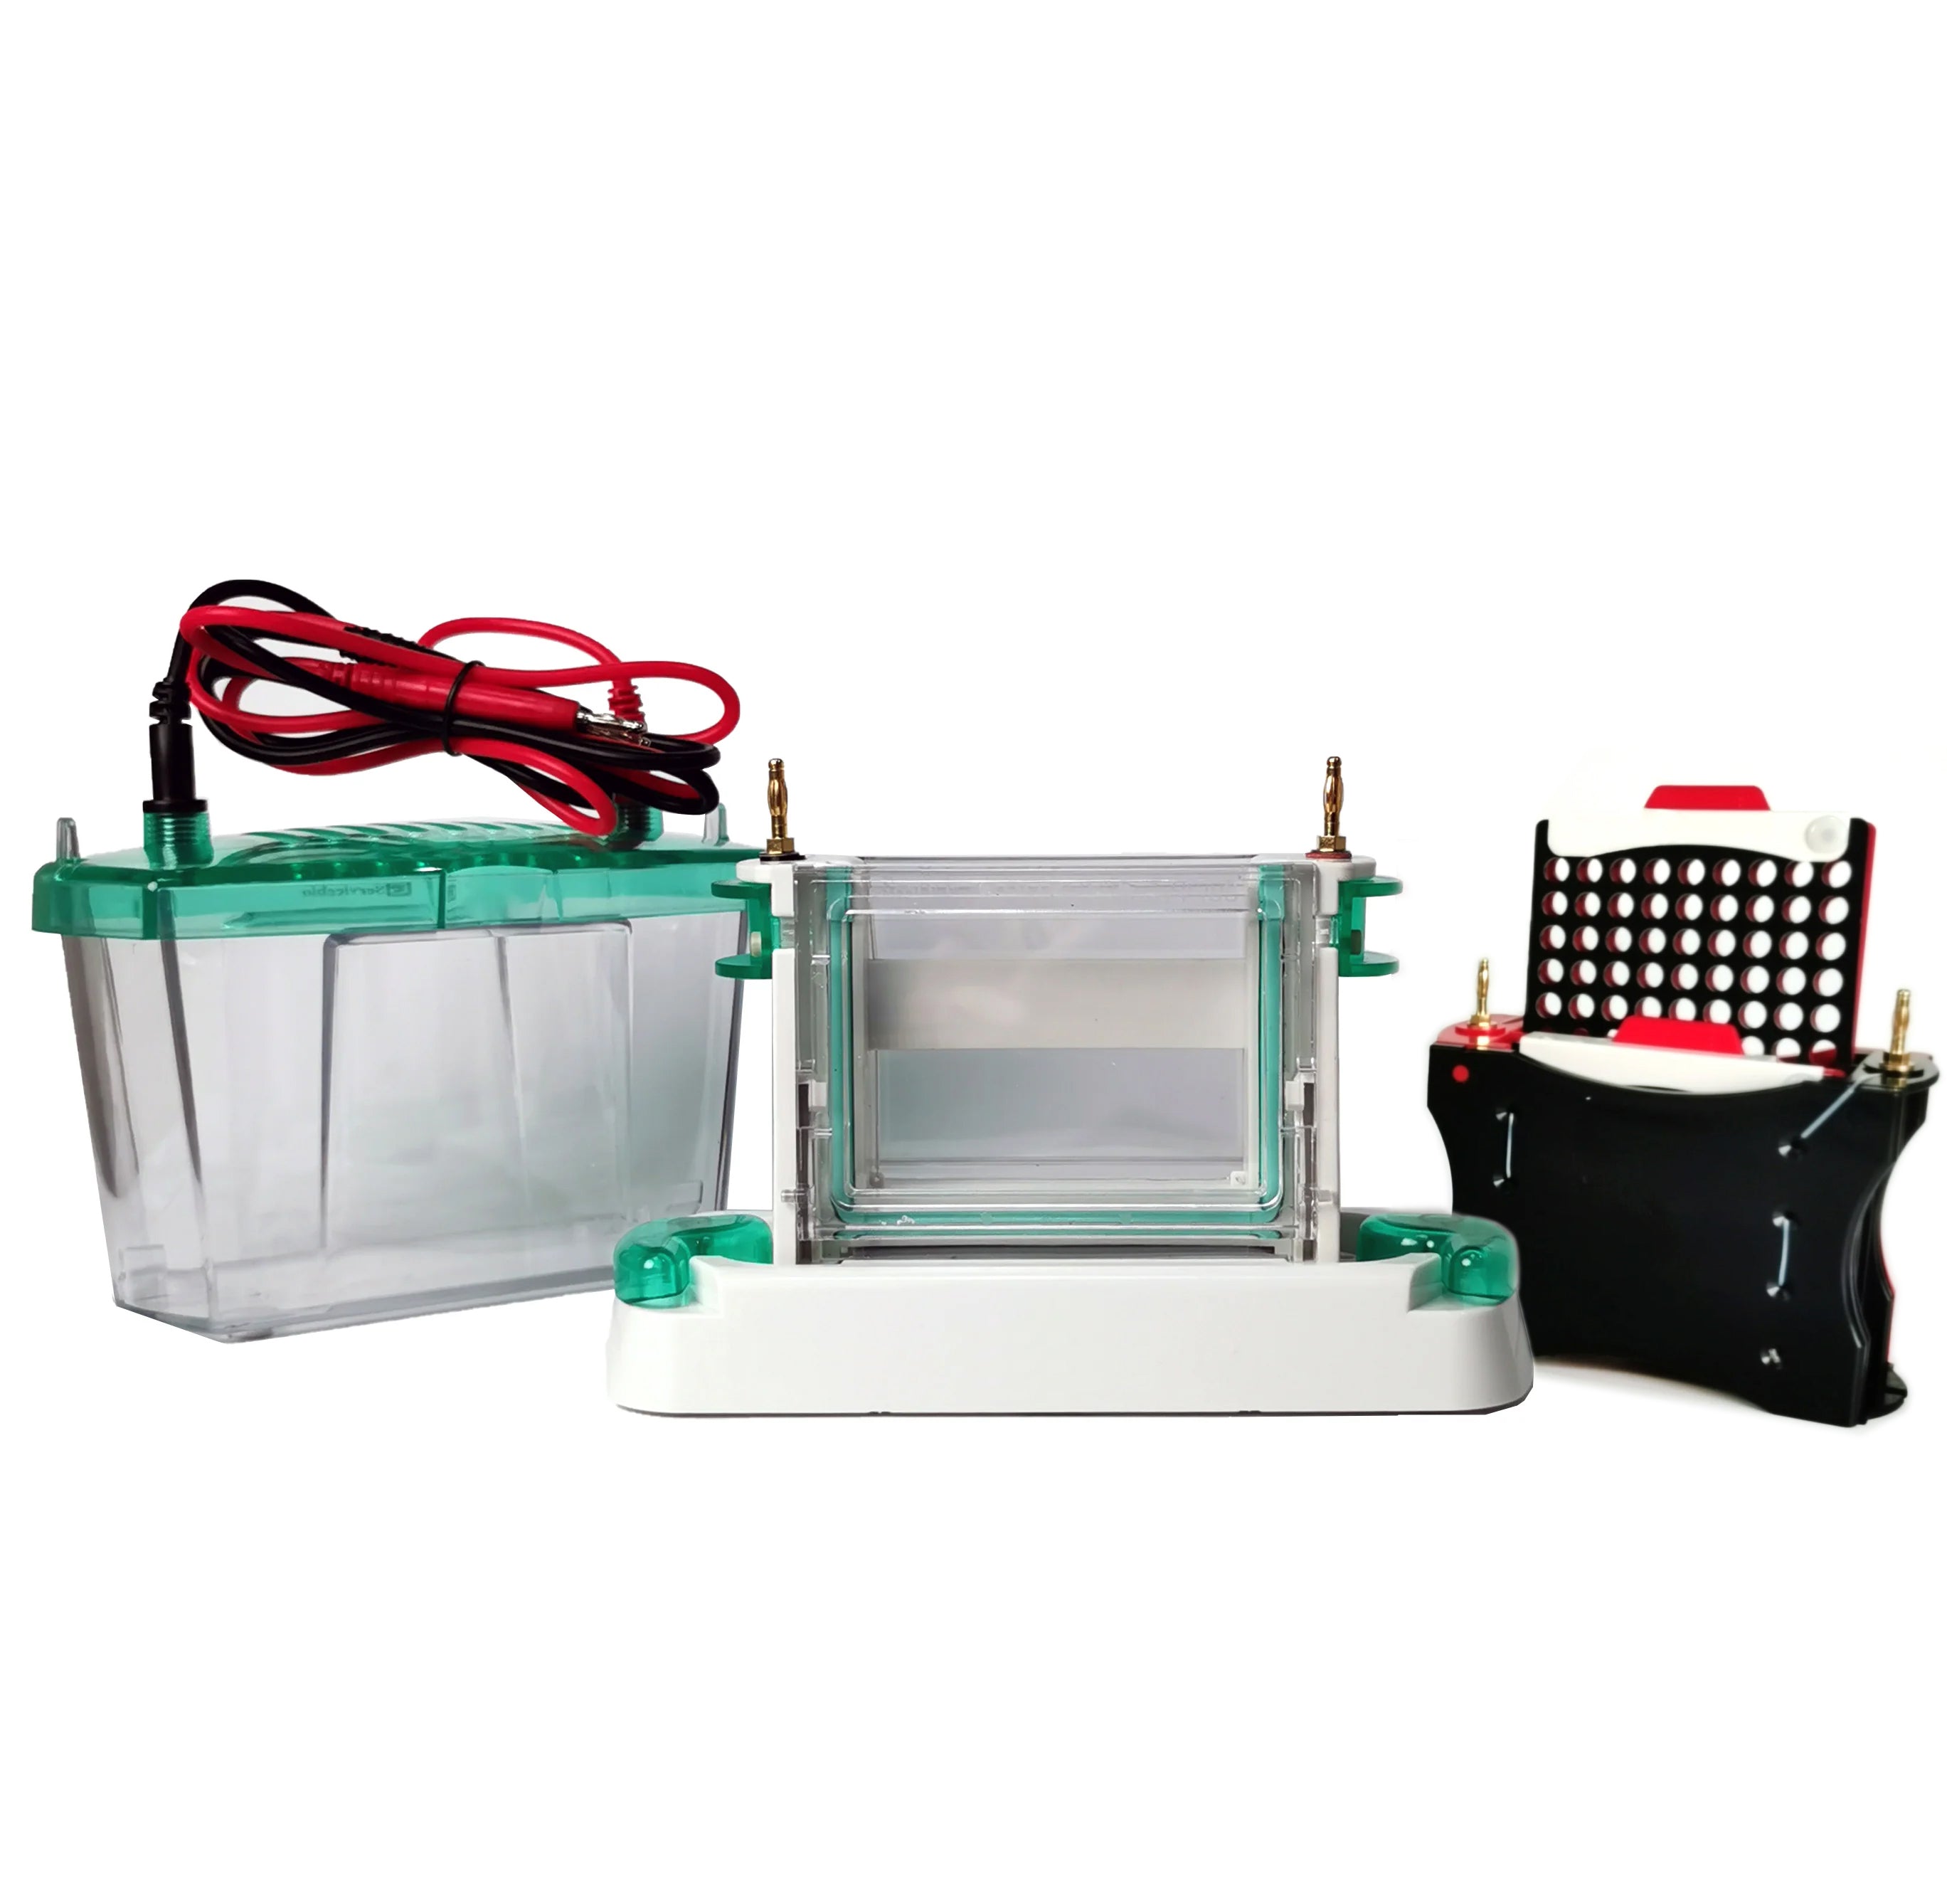 Package 2 - Vertical Electrophoresis System, Blotting system and Universal Power Supply